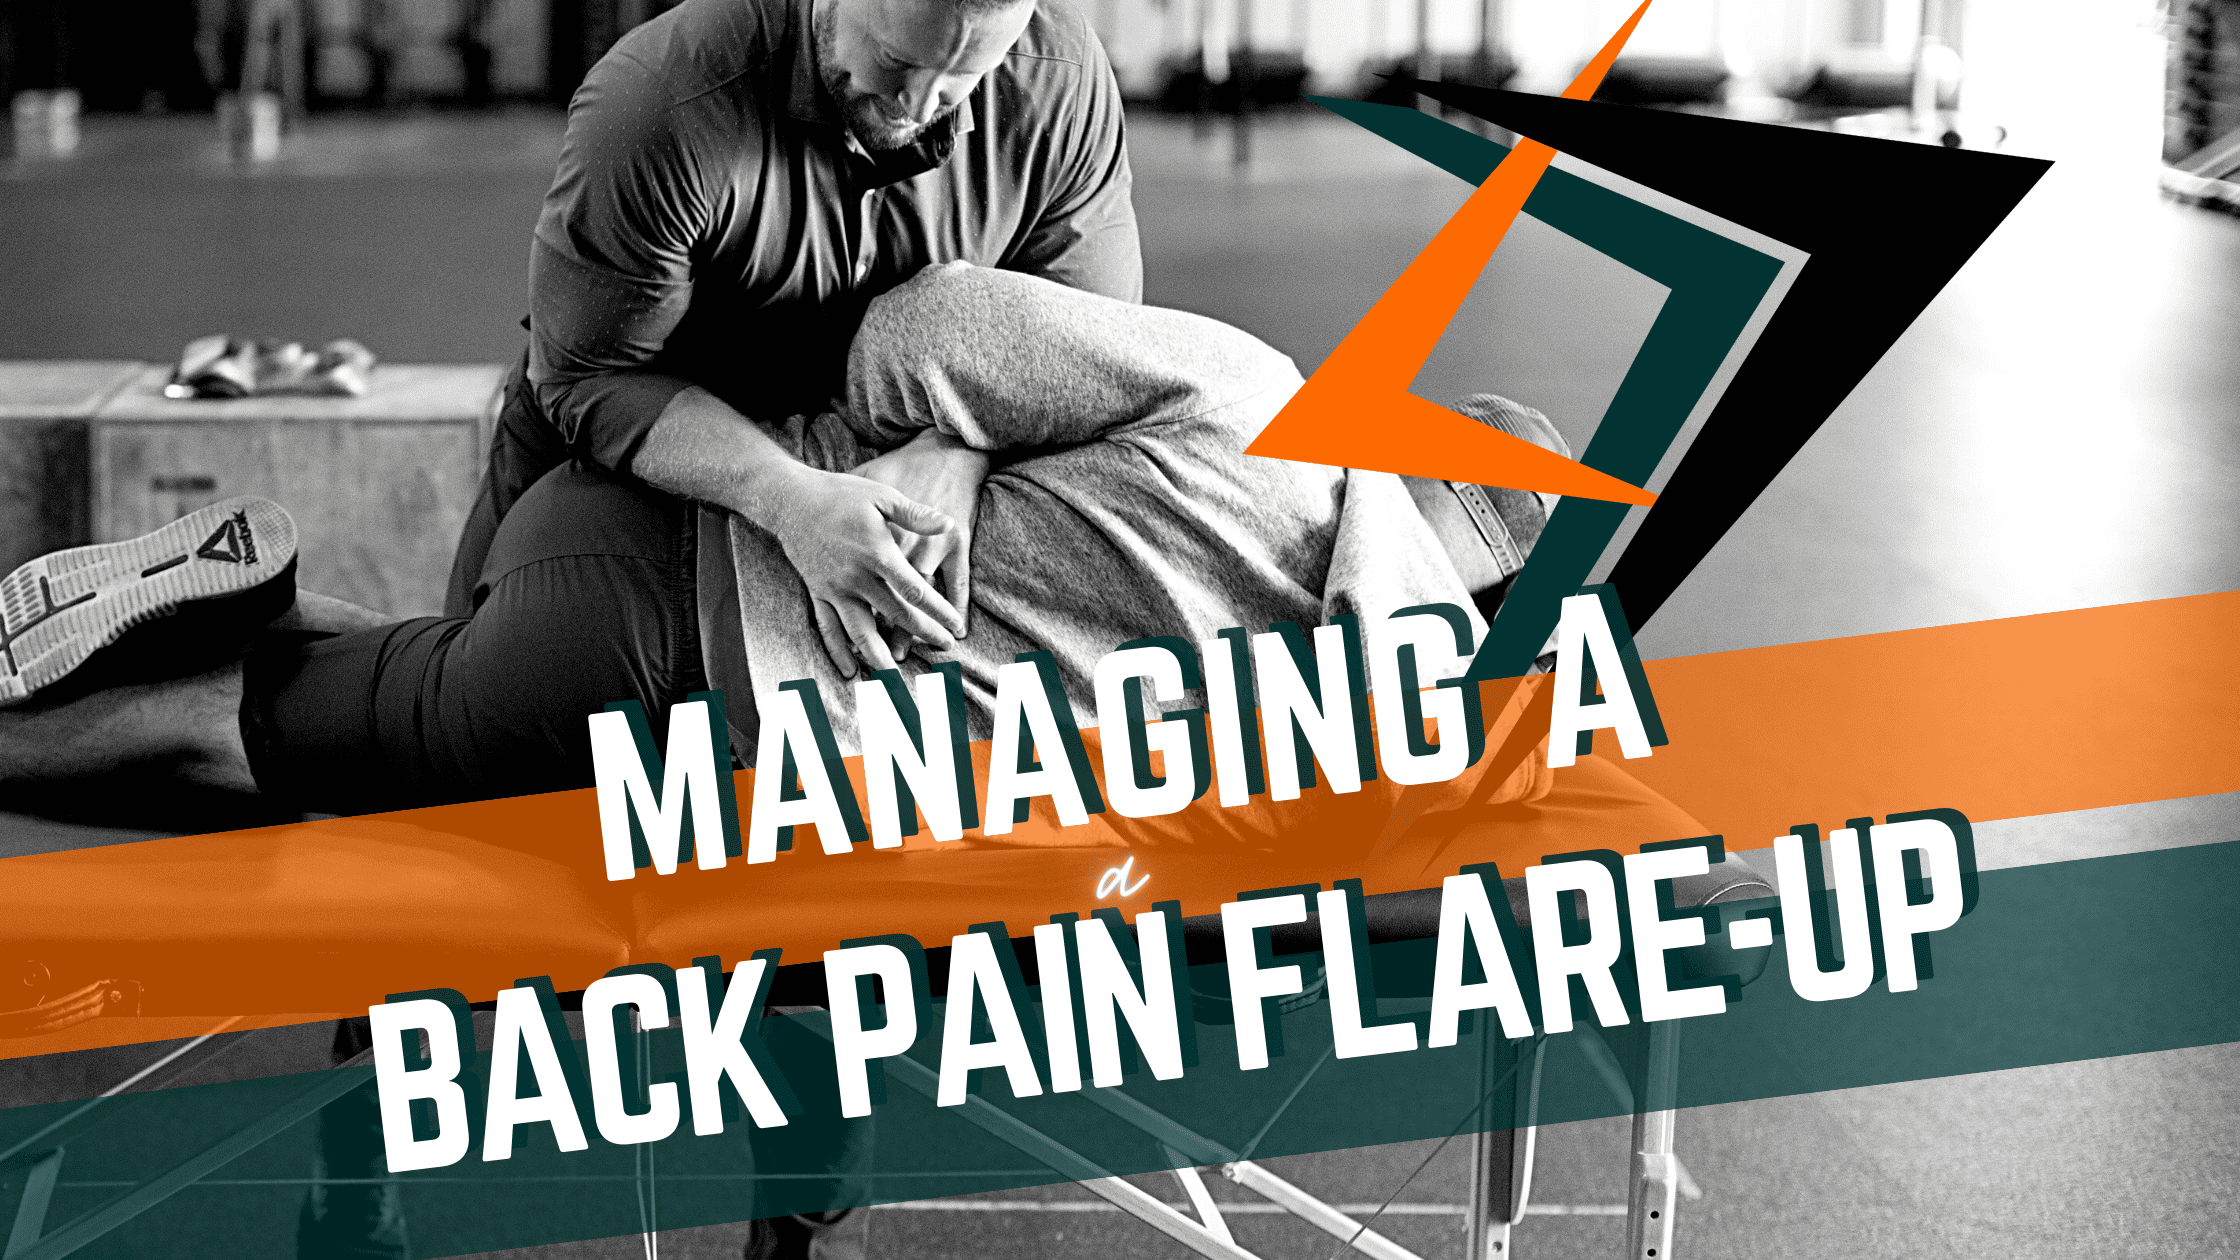 Featured image for “Managing a Back Pain Flare-Up”